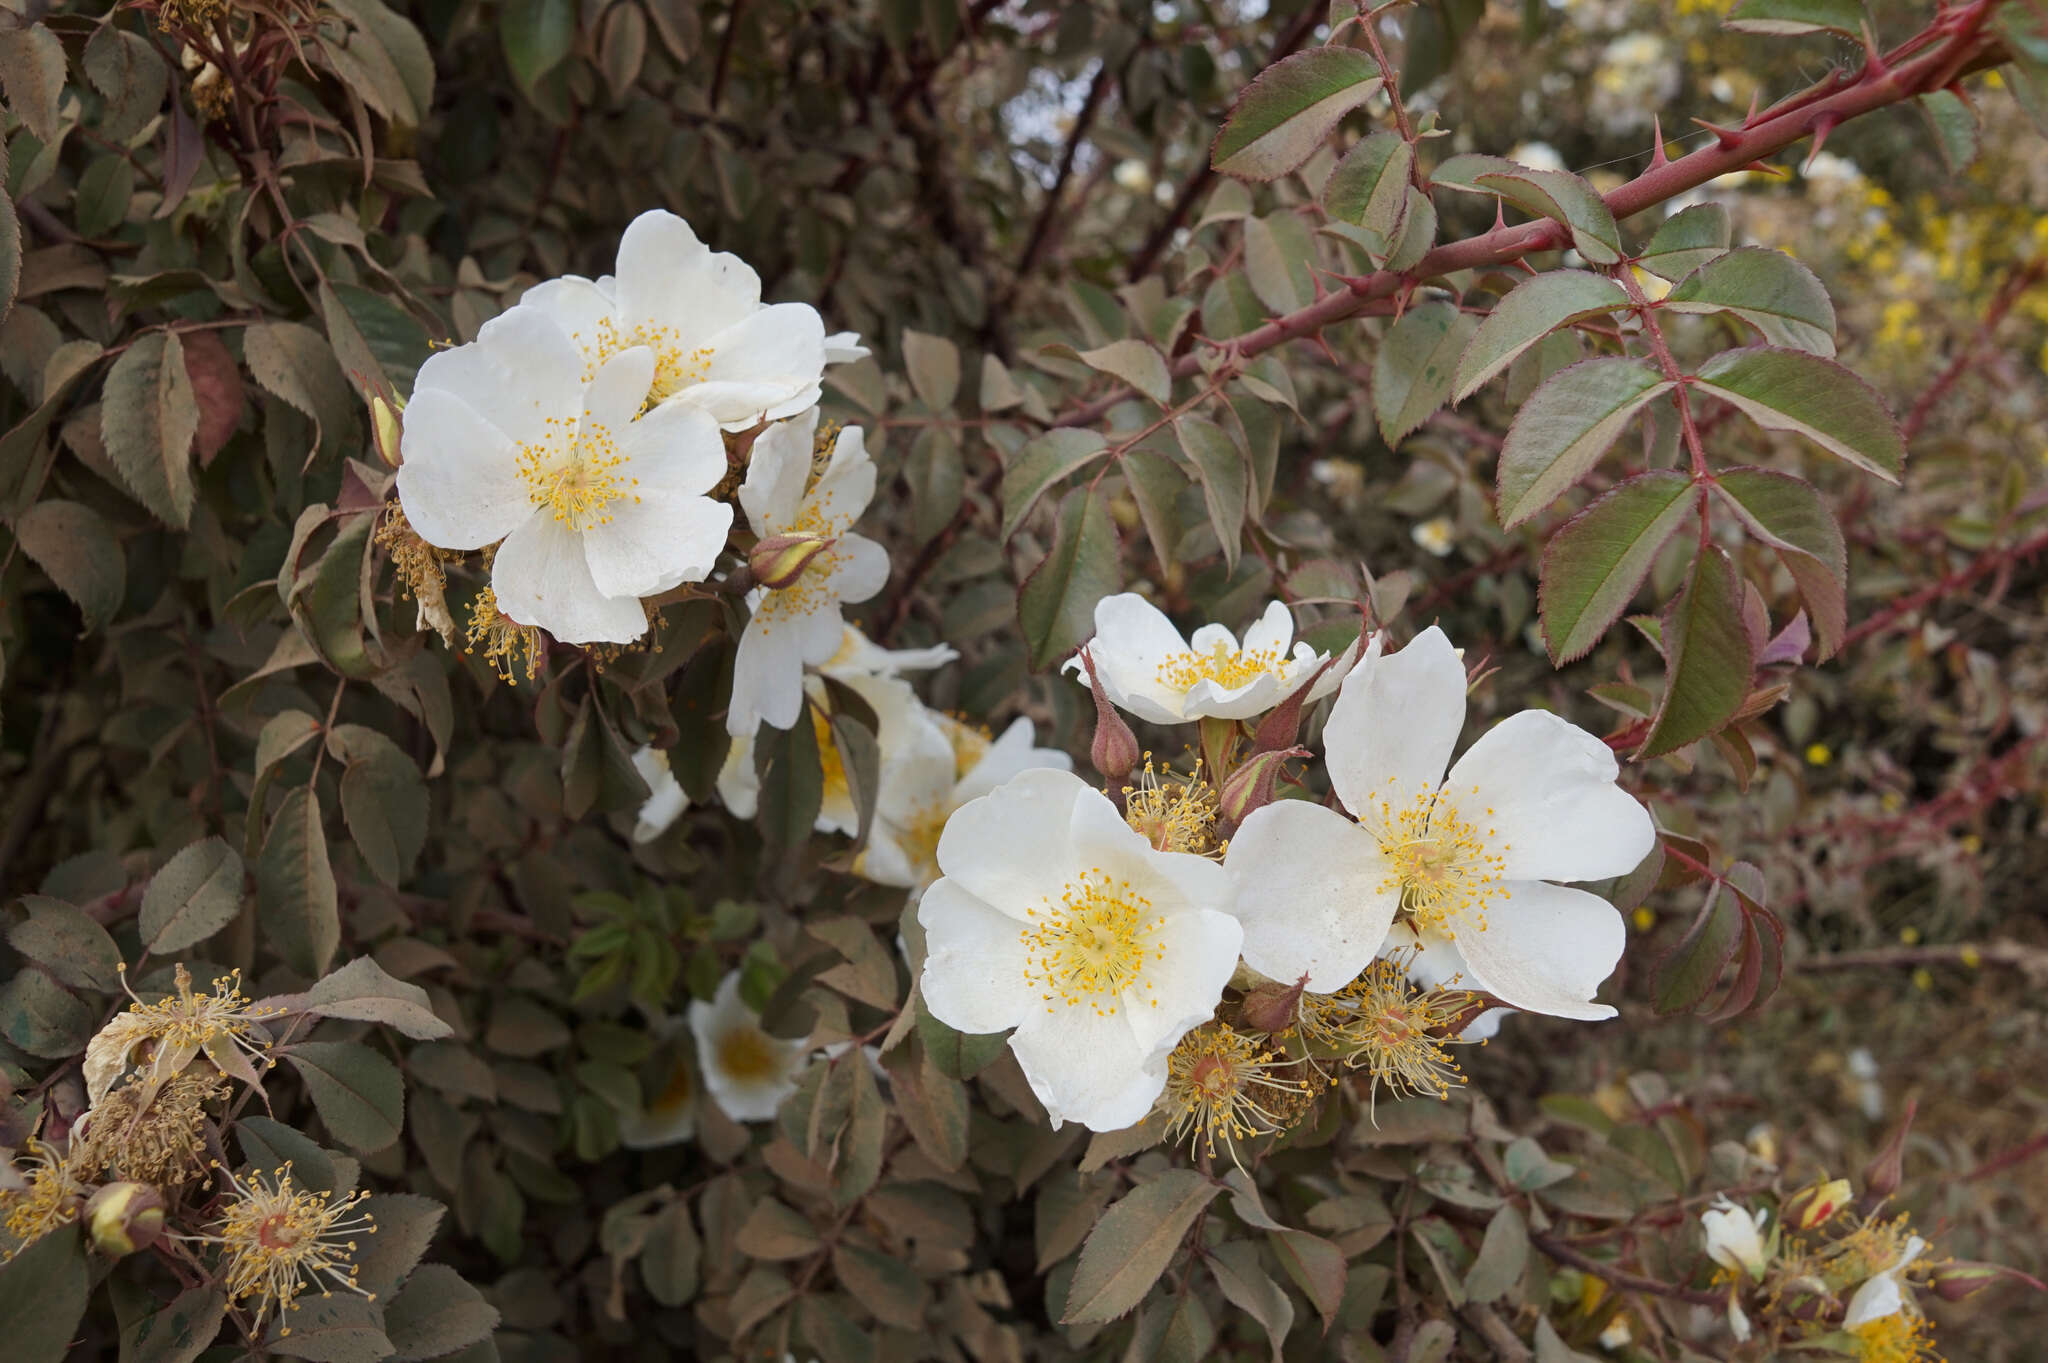 Image of Rosa abyssinica R. Br.